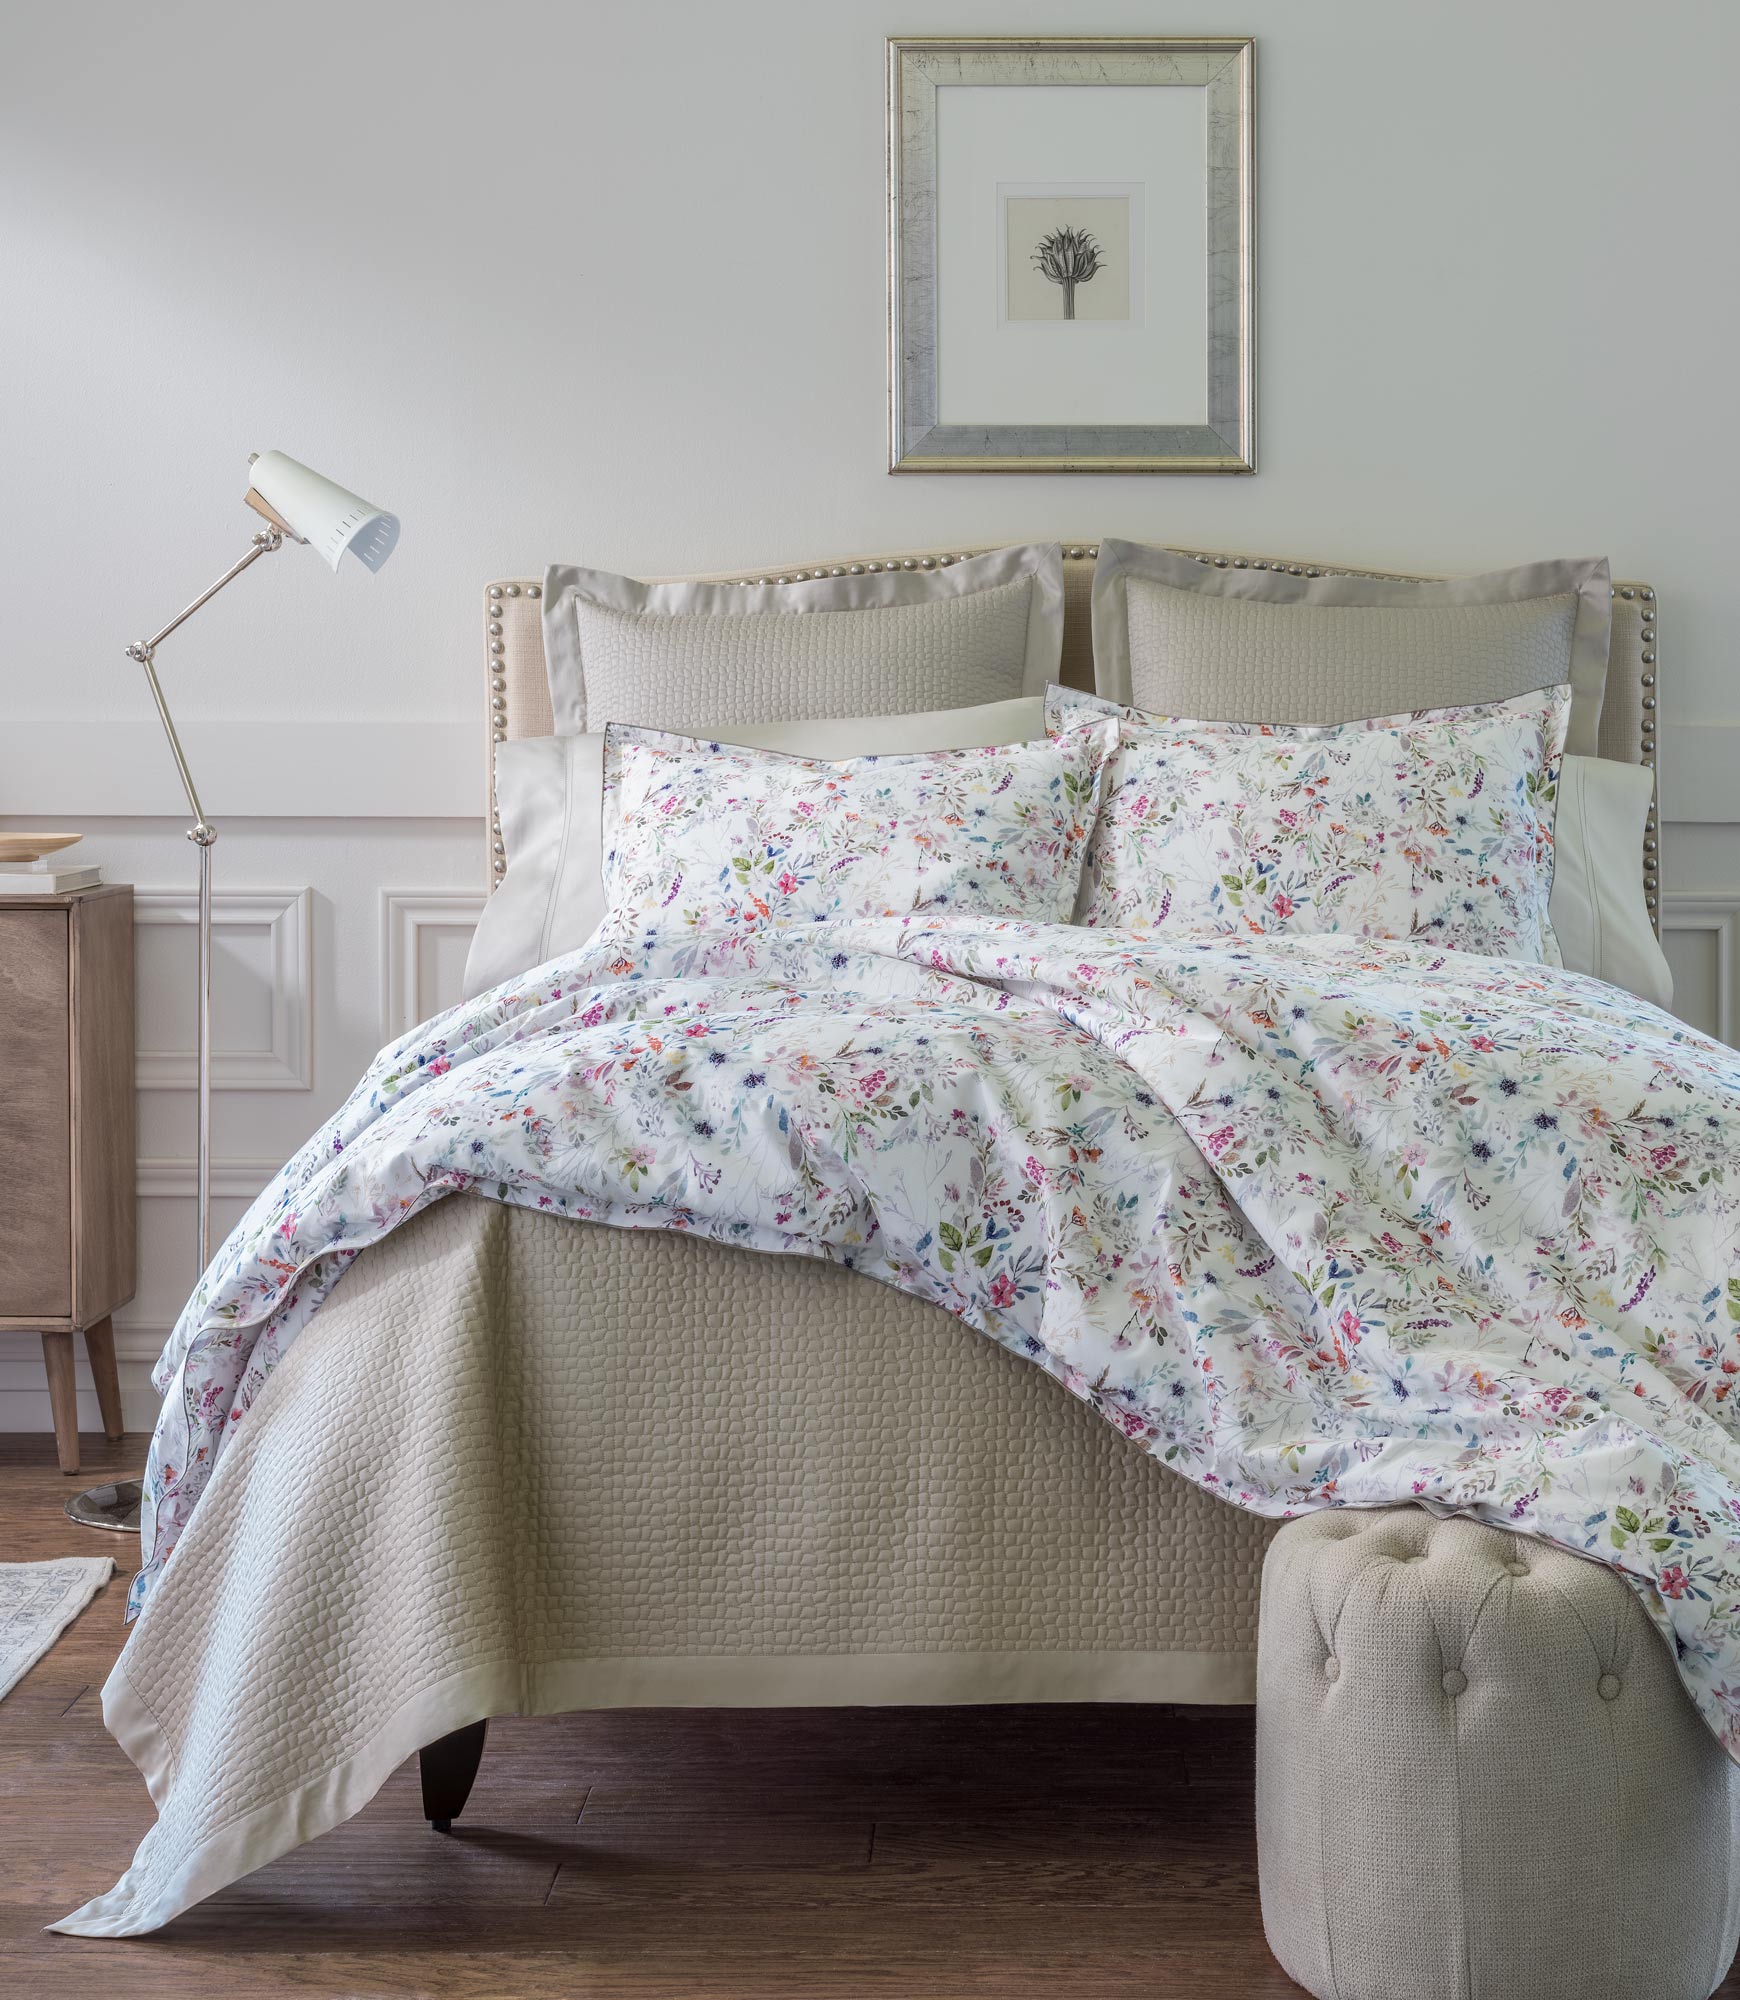 Cotton Duvet Covers: Soft Fabric and Enchanting Patterns